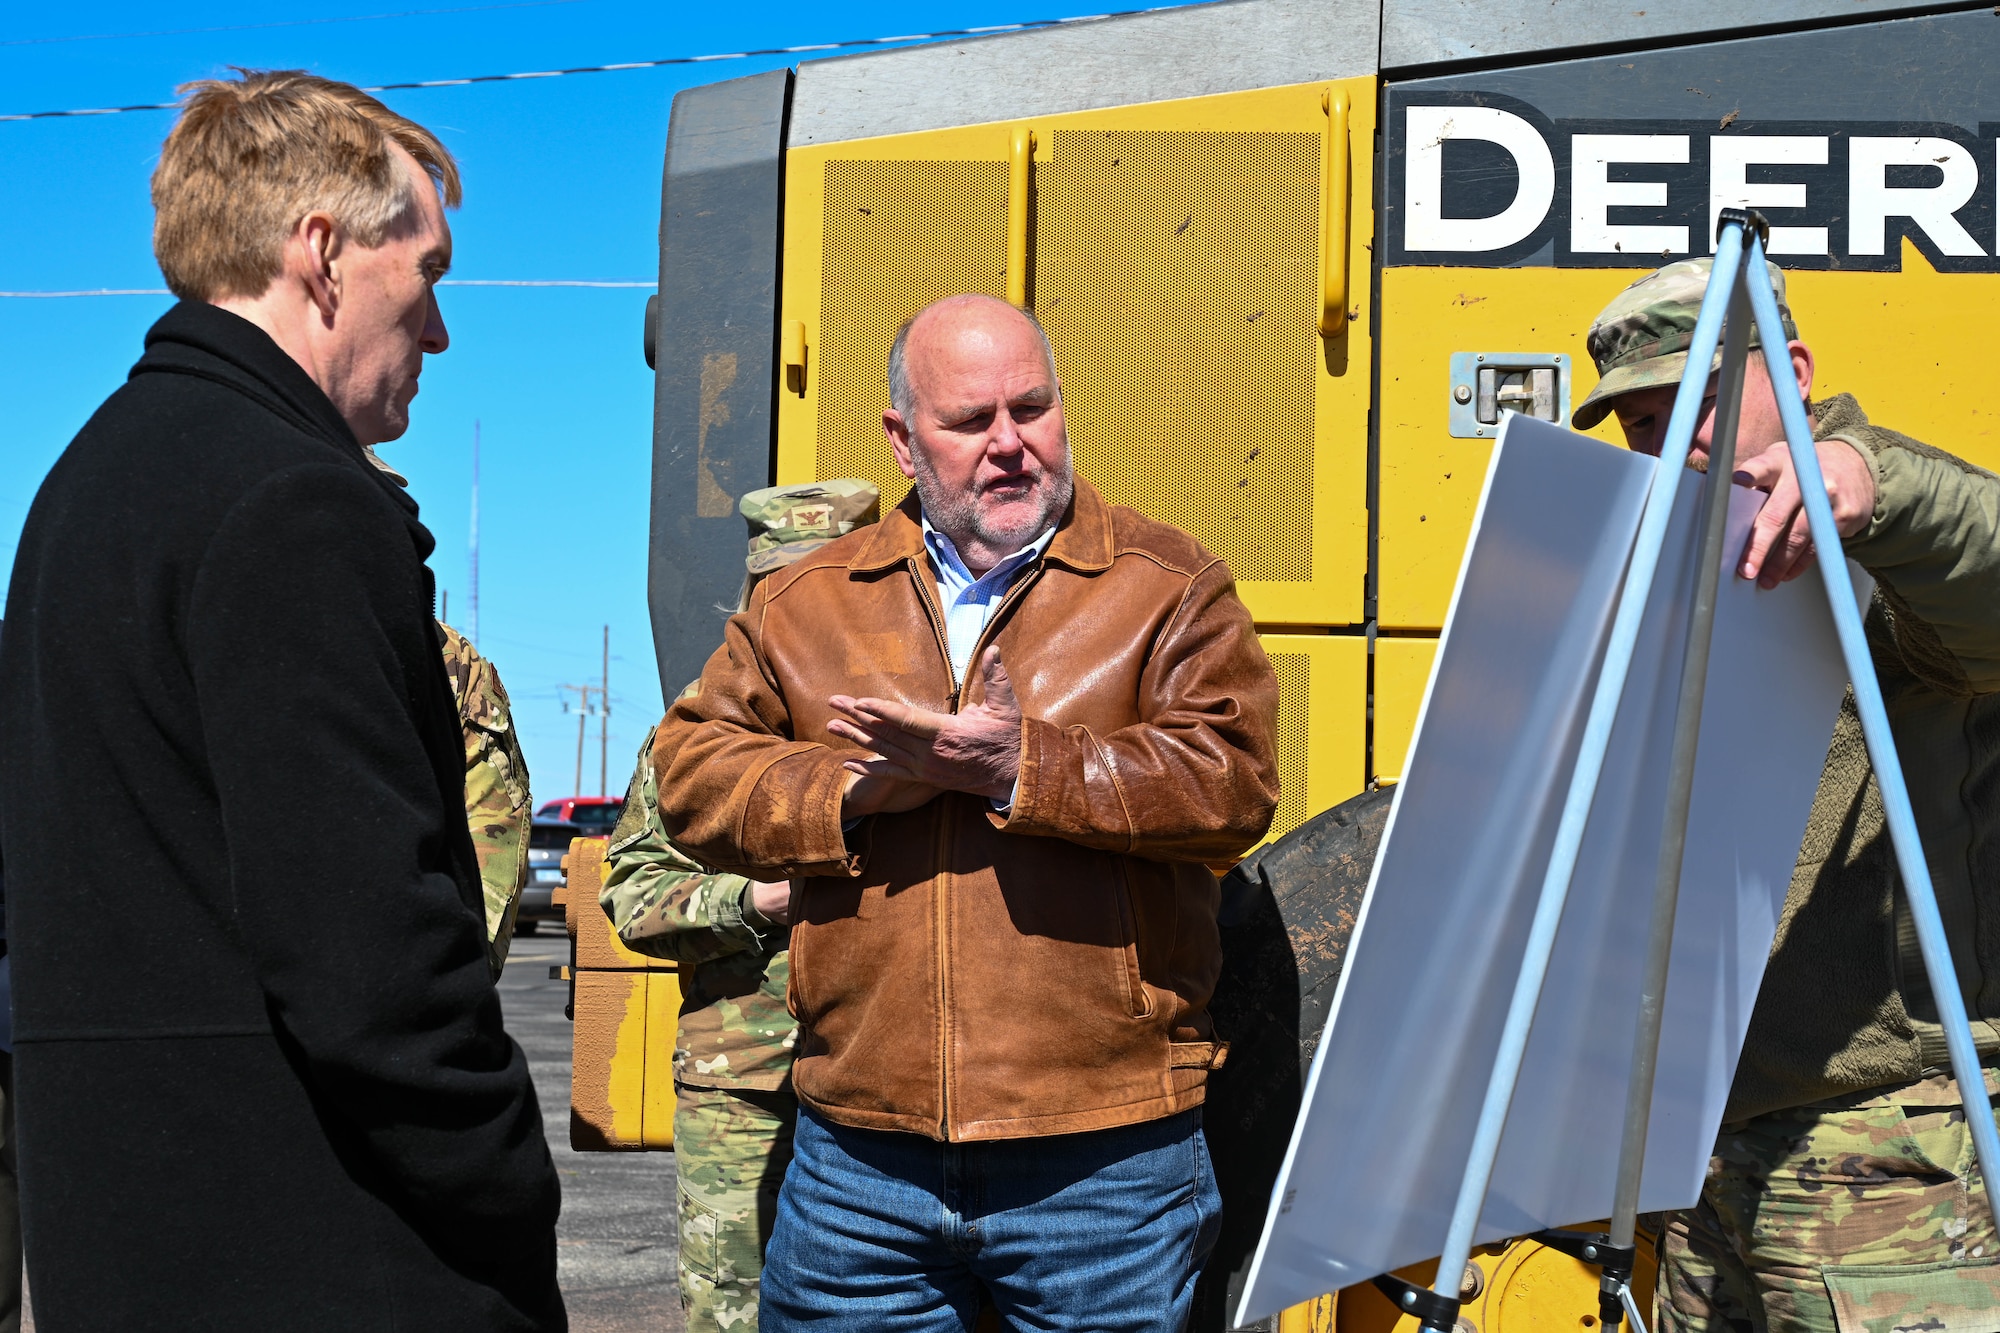 Gary Jones (center), Altus city manager, discusses a new off-base housing project in Altus, Oklahoma, with U.S. Sen. James Lankford of Oklahoma (left), Feb. 23, 2023. The project will add 156 housing units for the local community and service members at Altus Air Force Base. (U.S. Air Force photo by Senior Airman Trenton Jancze)